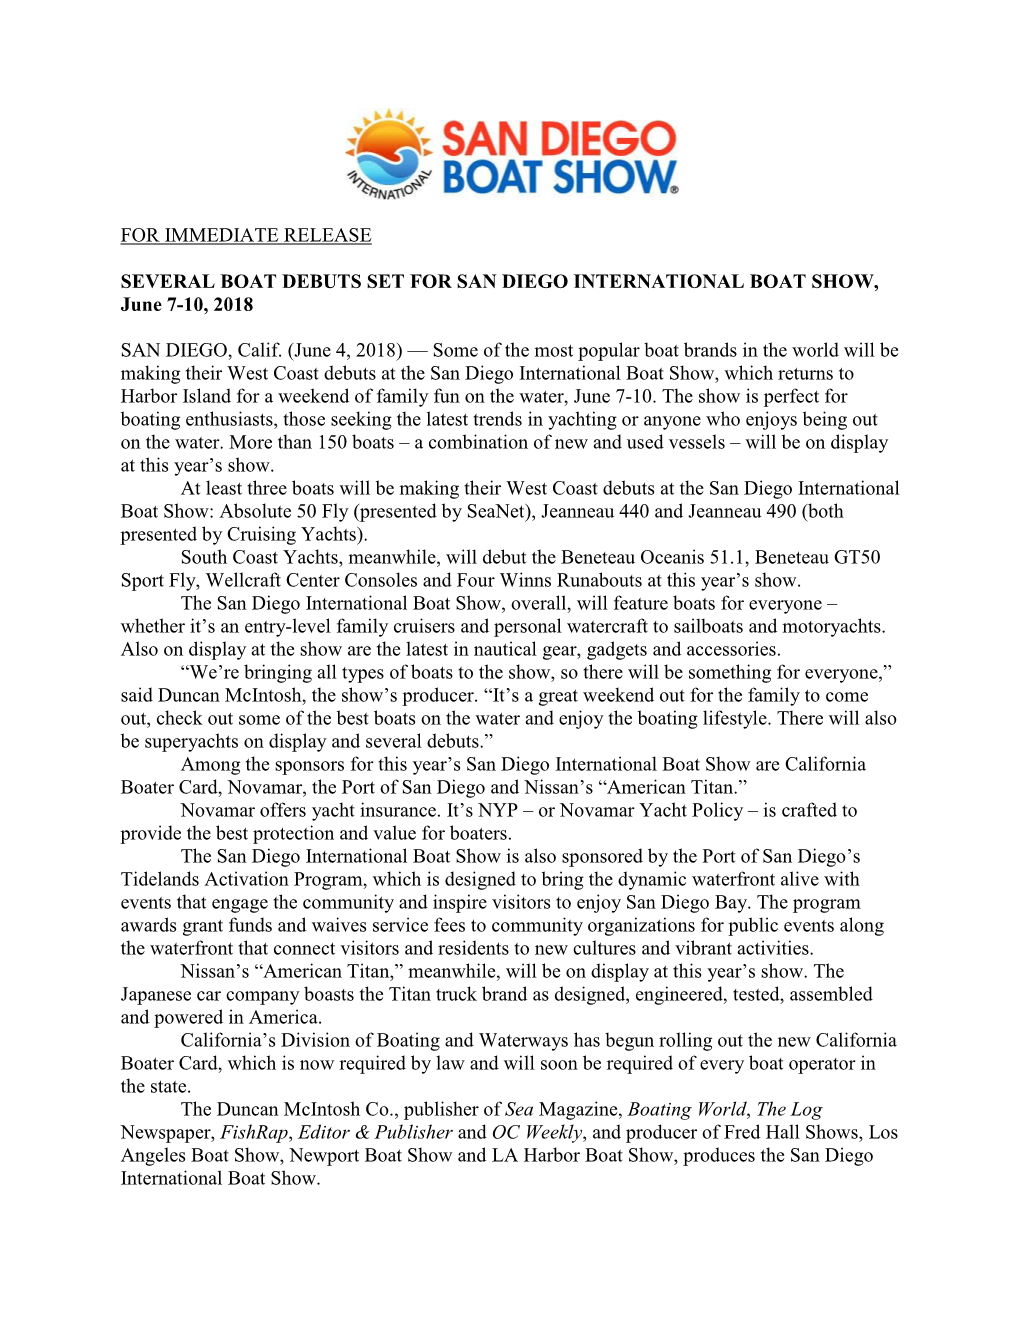 For Immediate Release Several Boat Debuts Set